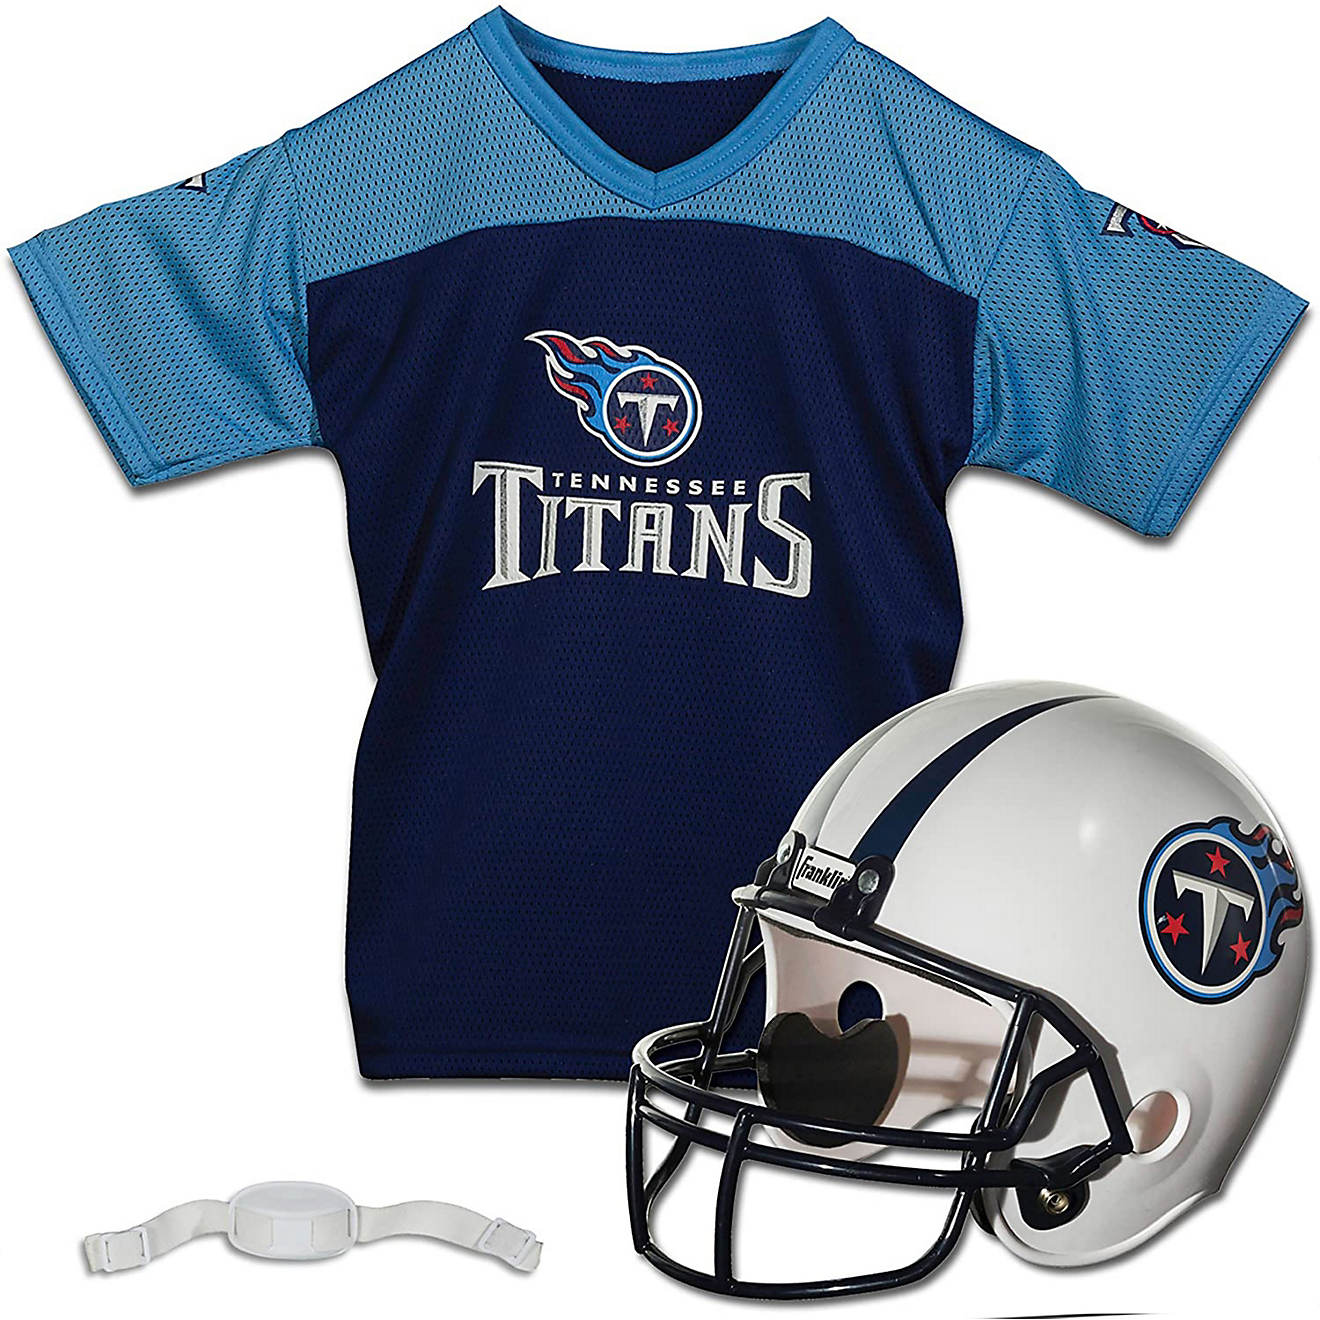 Franklin Kids' Tennessee Titans Football Helmet and Jersey Uniform Set                                                           - view number 1